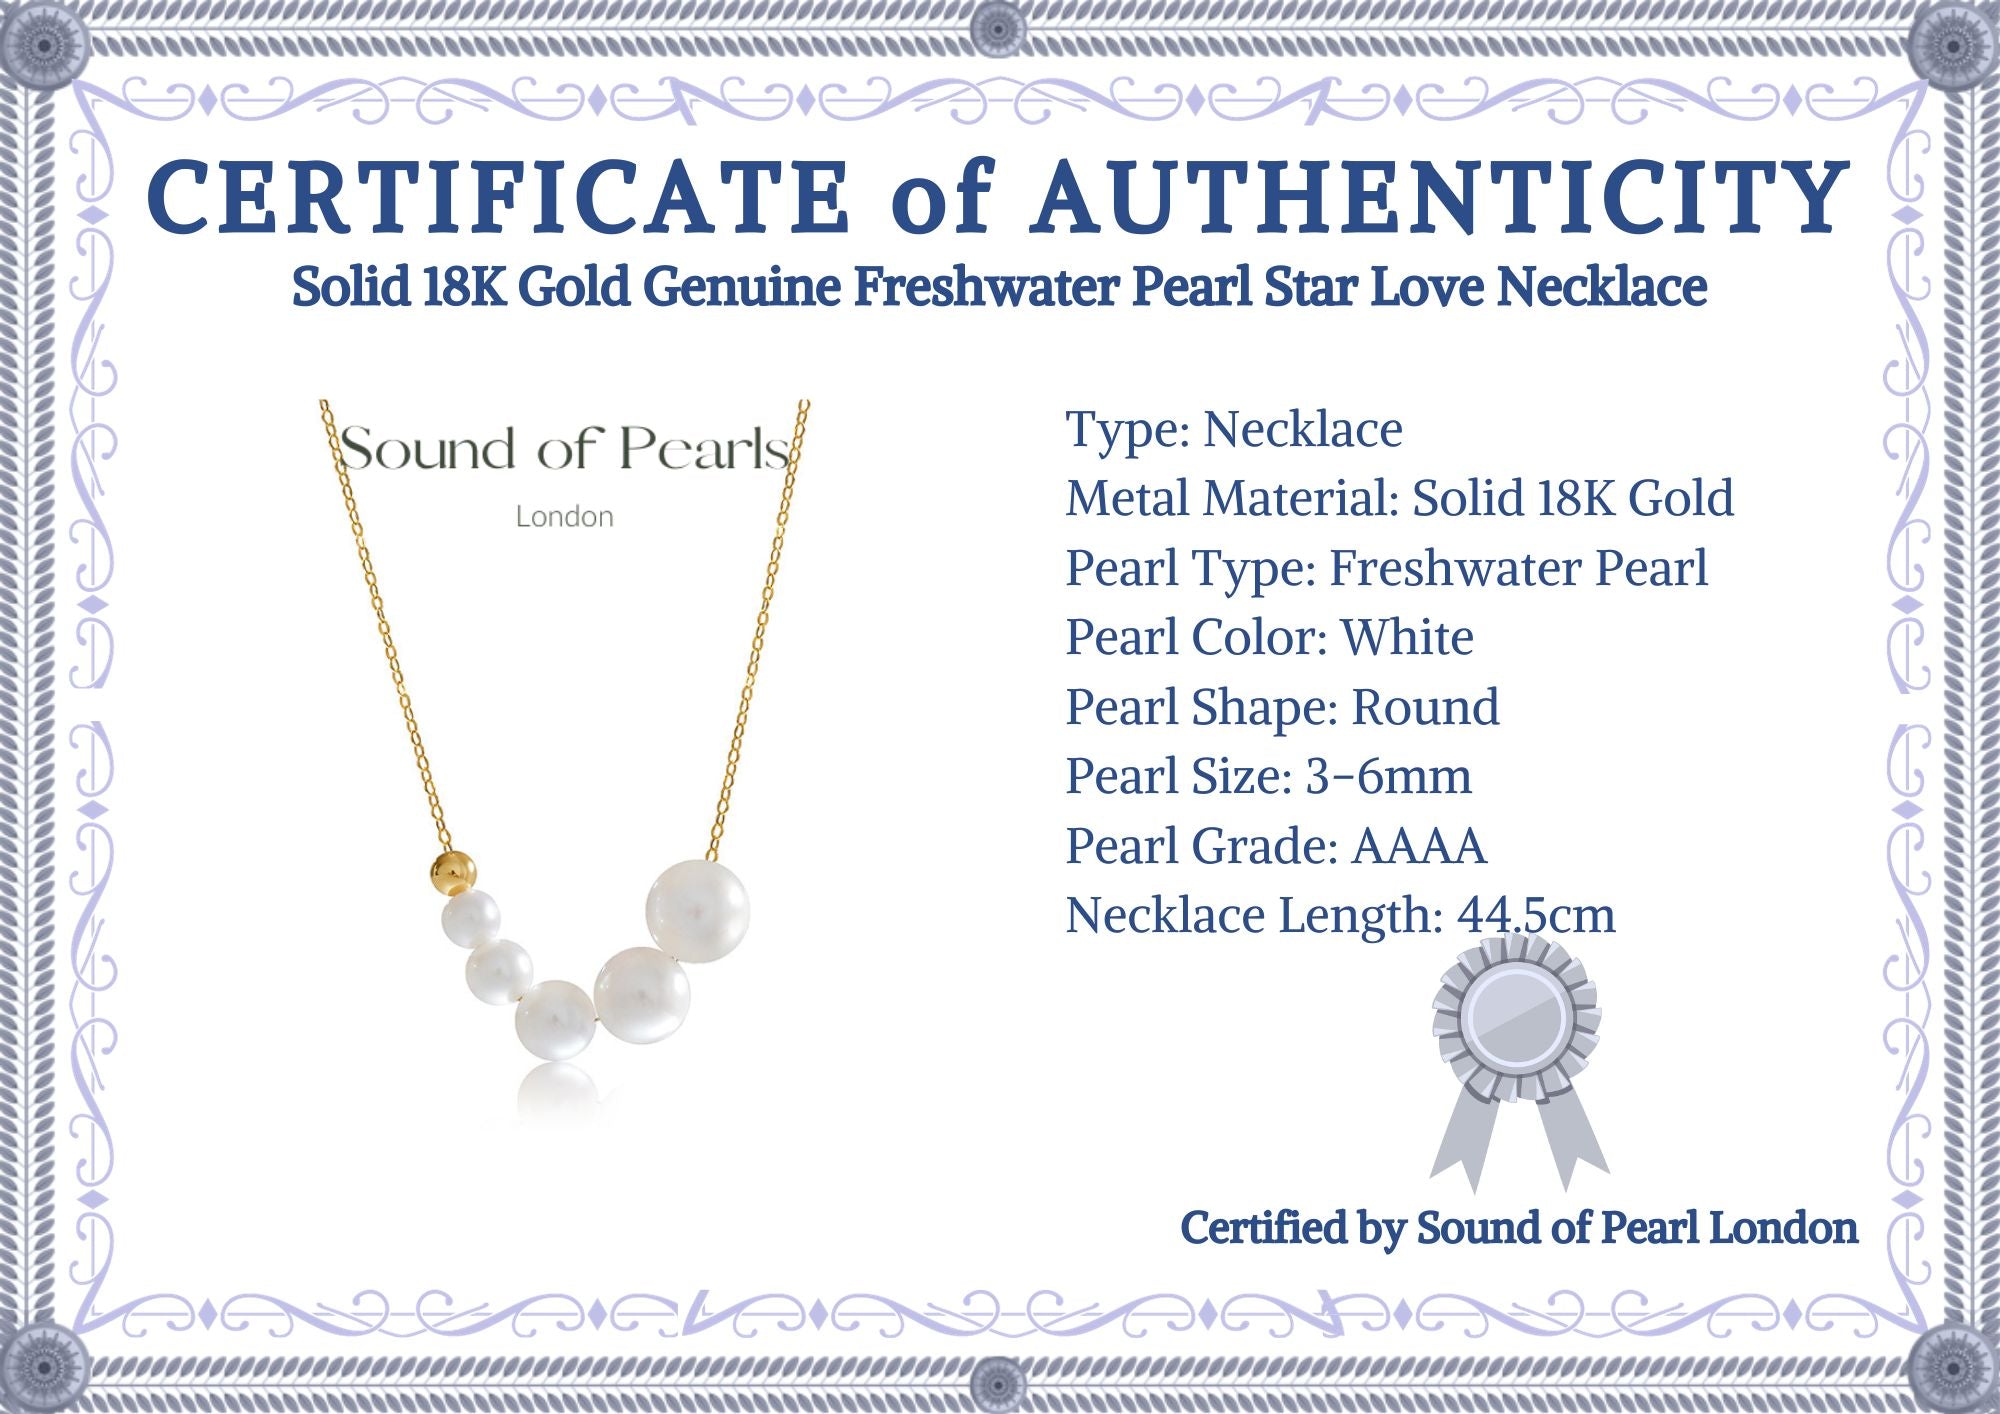 Solid 18K Gold Genuine Freshwater Pearl Star Love Necklace